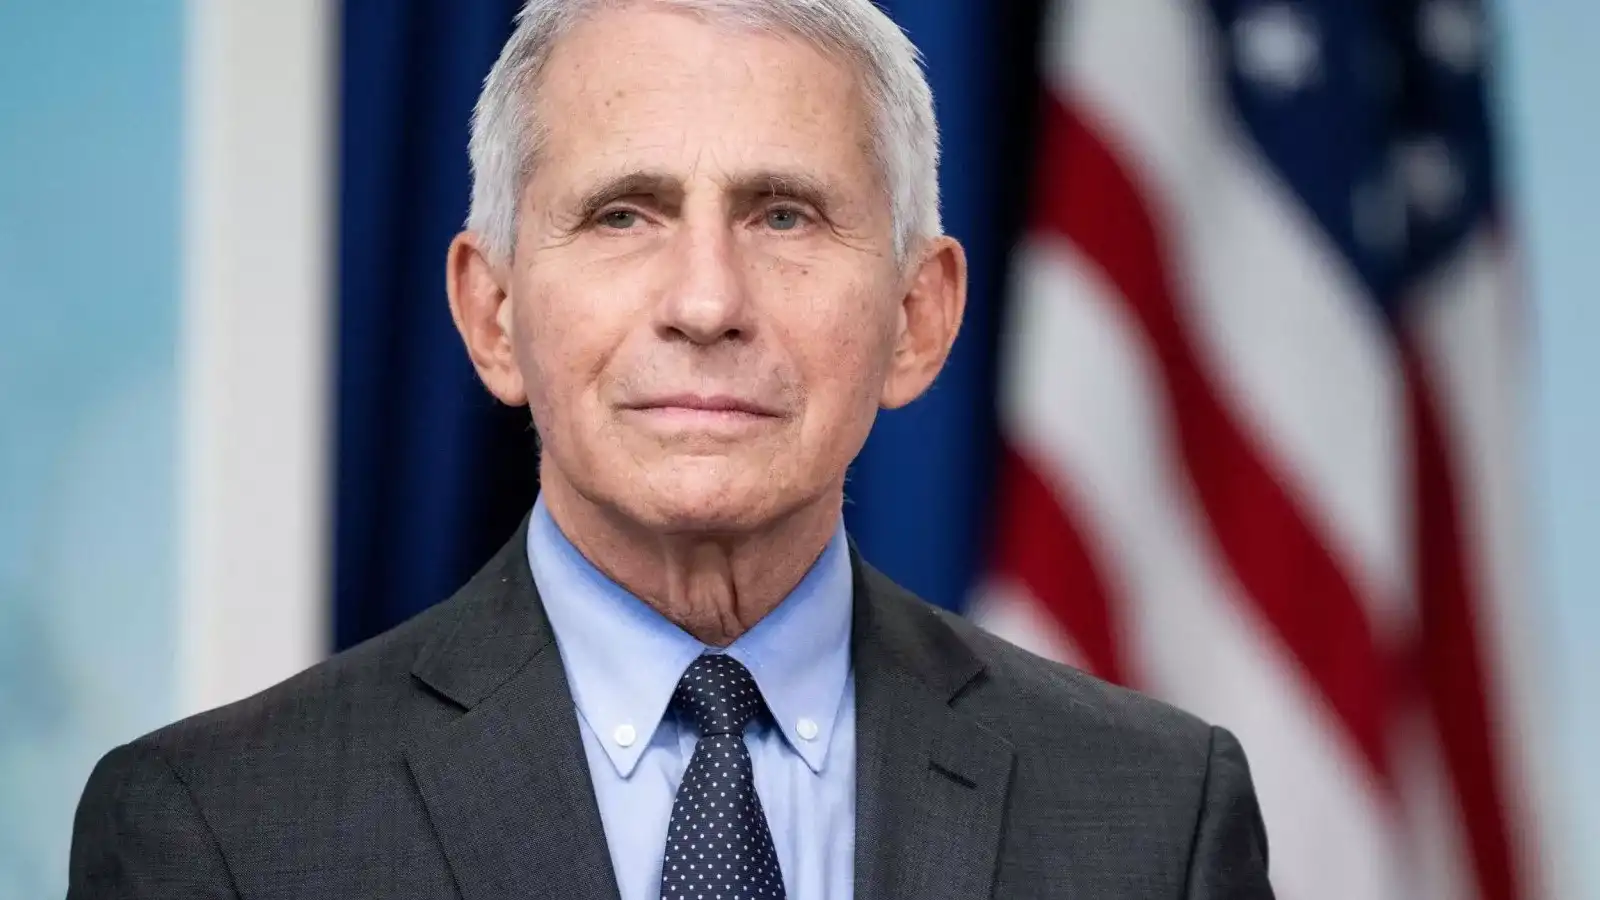 Anthony Fauci wins prestigious award for contributions to science and public health